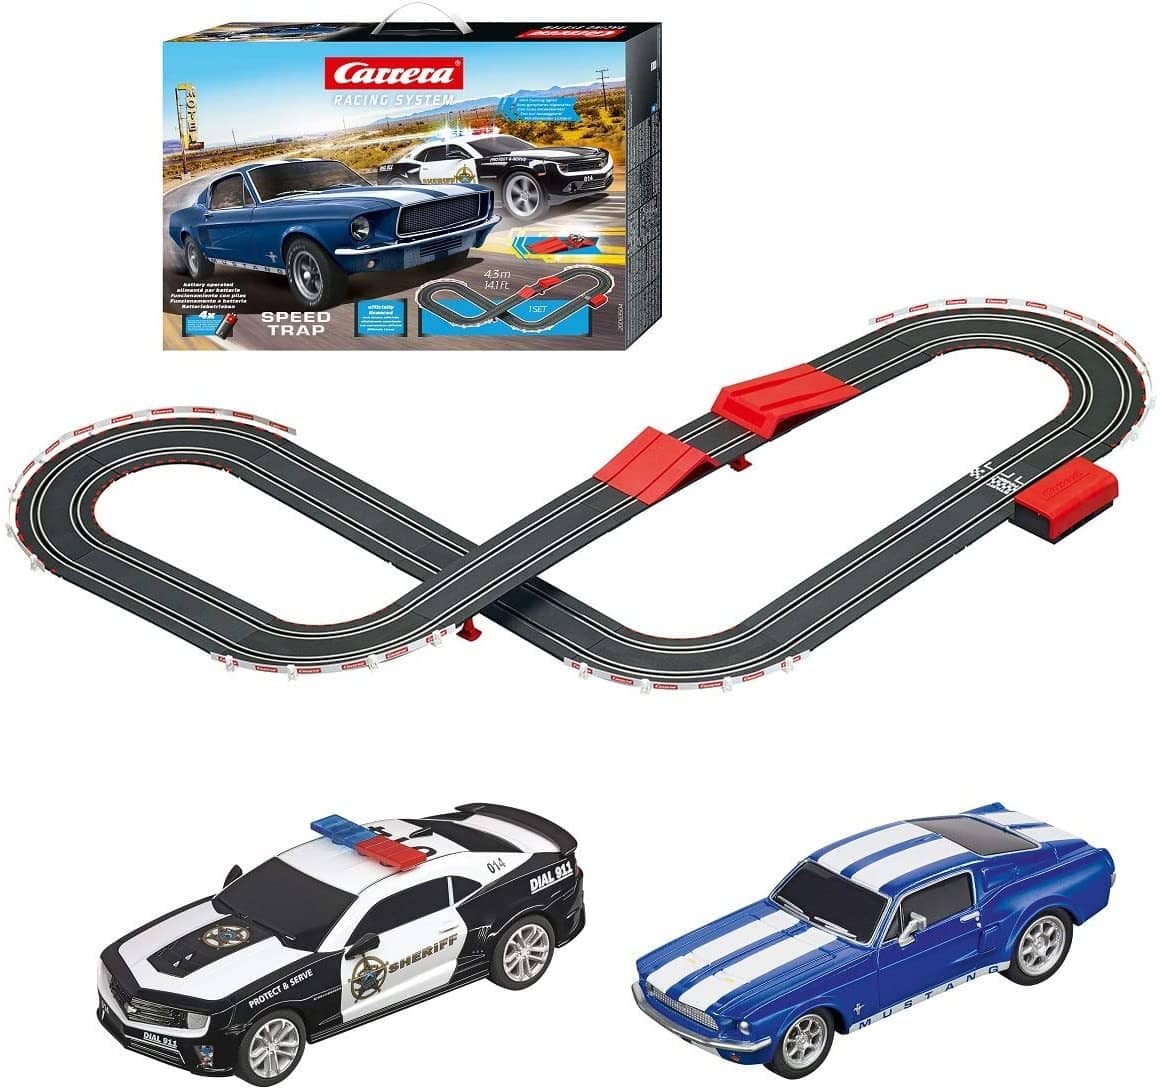 Carrera 63504 Speed Trap Battery Operated 1:43 Scale Slot Car Racing Track-Kidding Around NYC